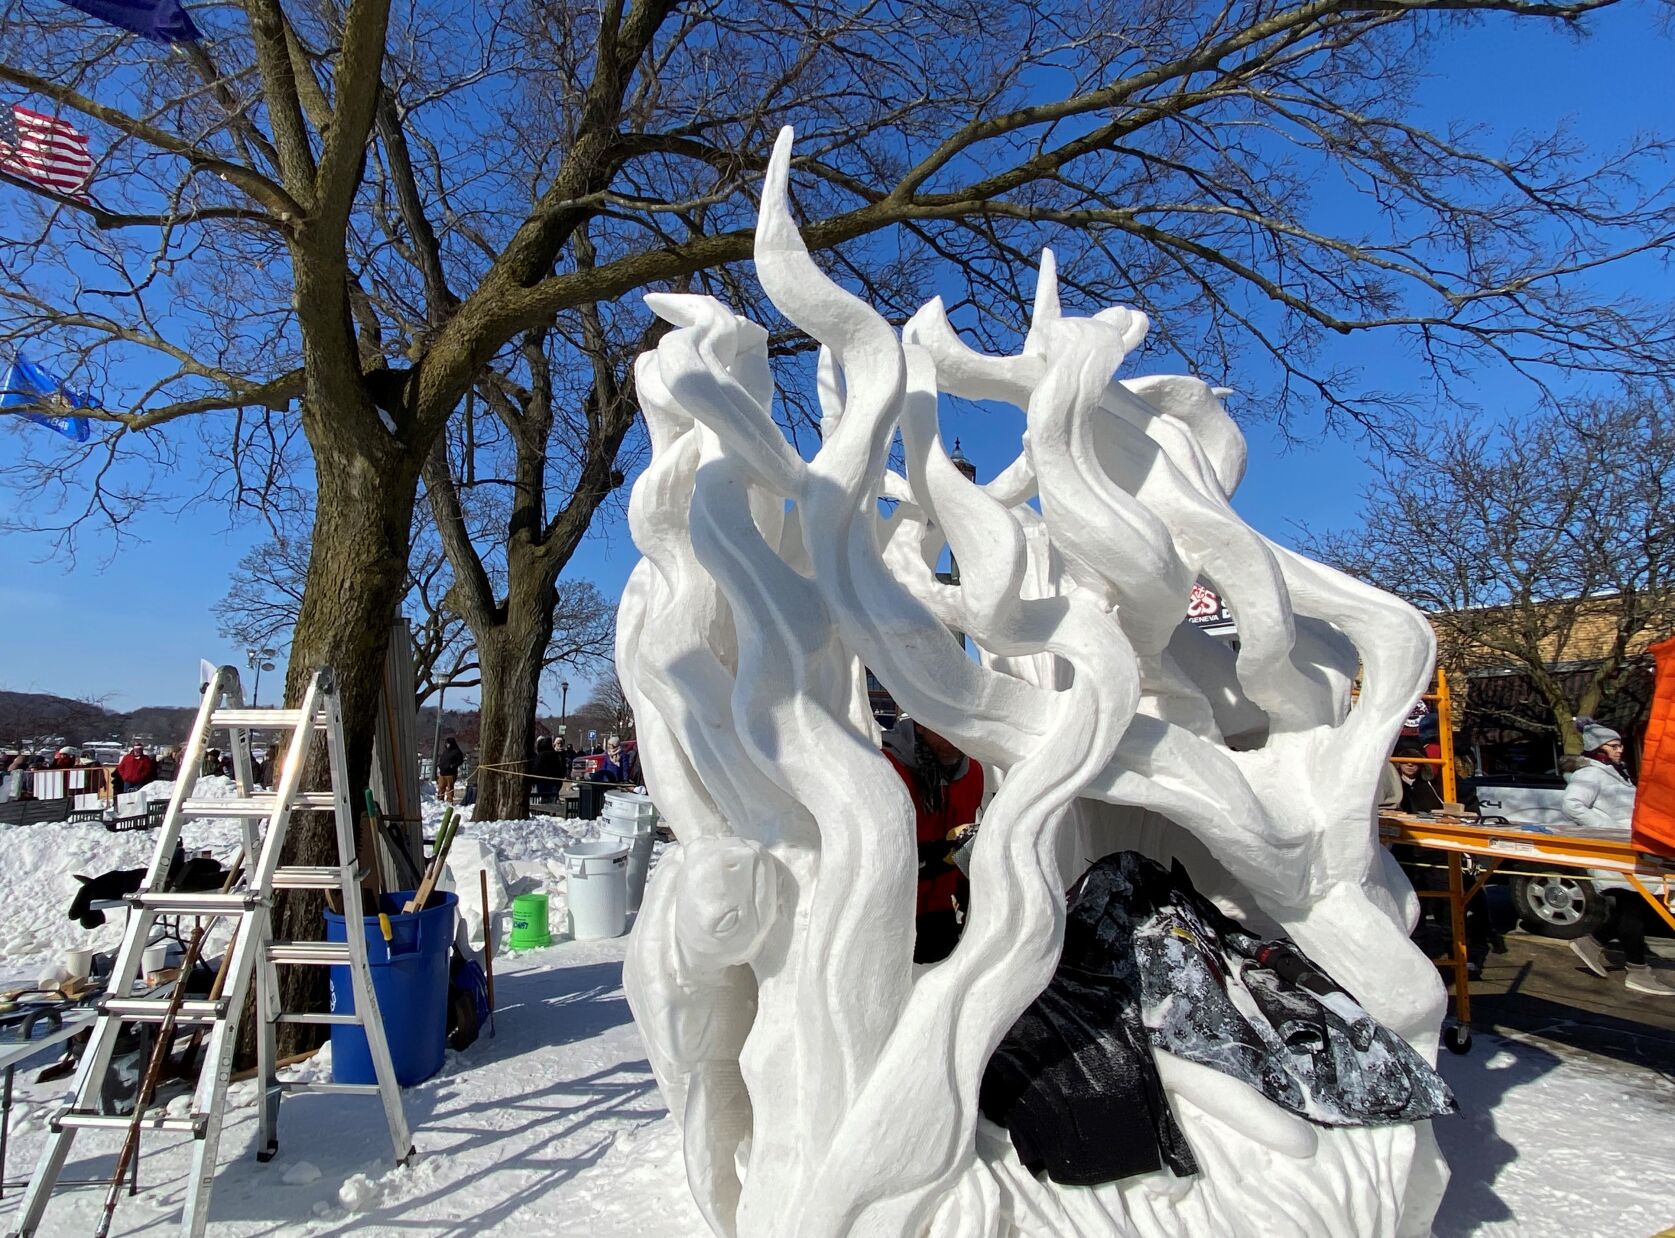 15 photos from the 2023 U.S. National Snow Sculpting Championship held